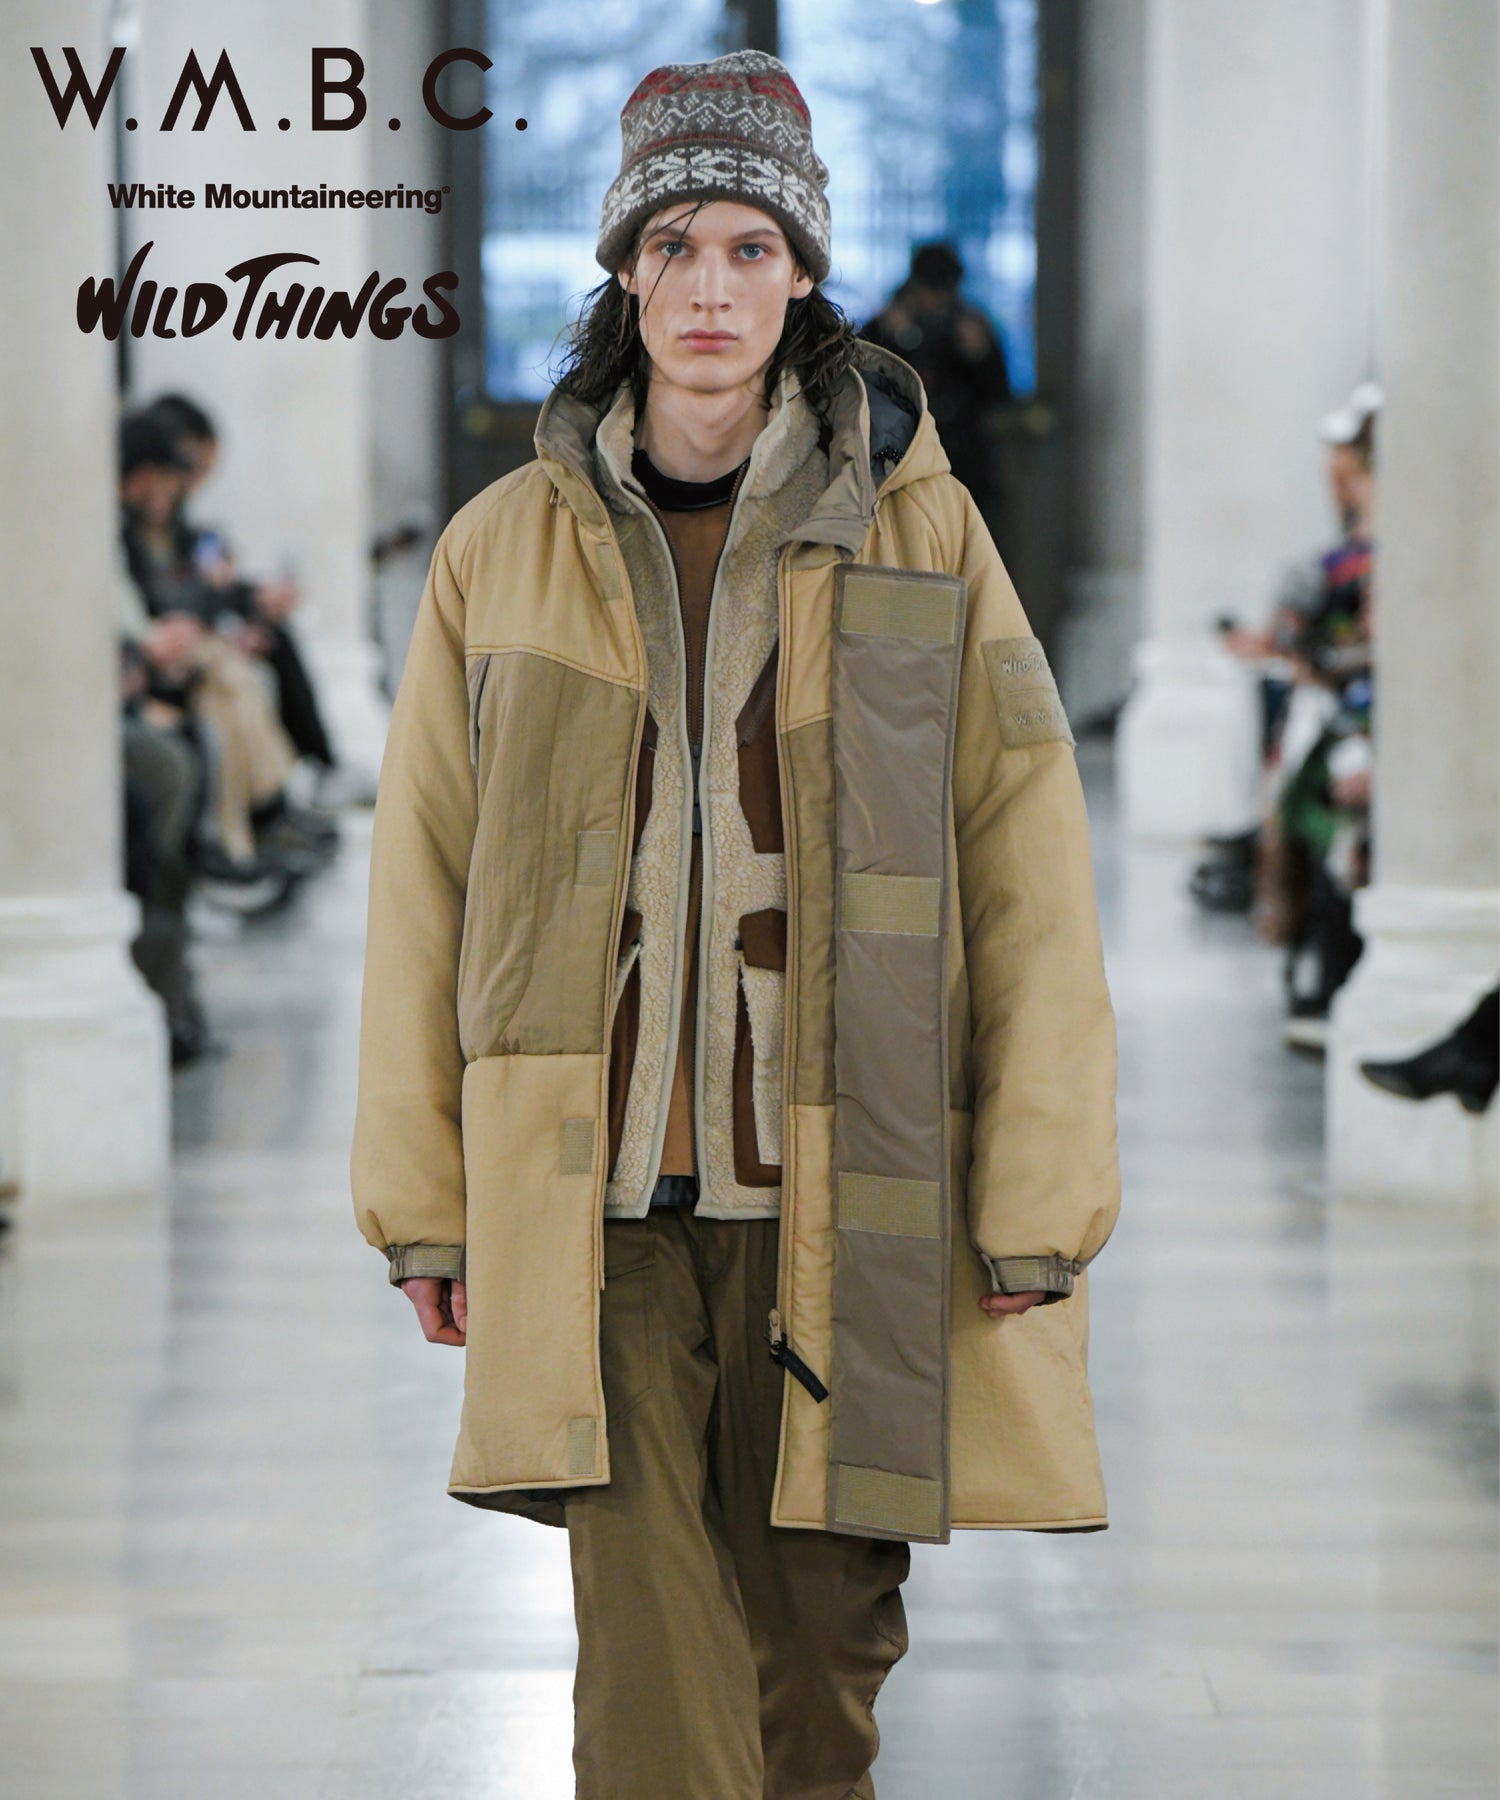 W.M.B.C. × WILD THINGS – White Mountaineering OFFICIAL WEB SITE.